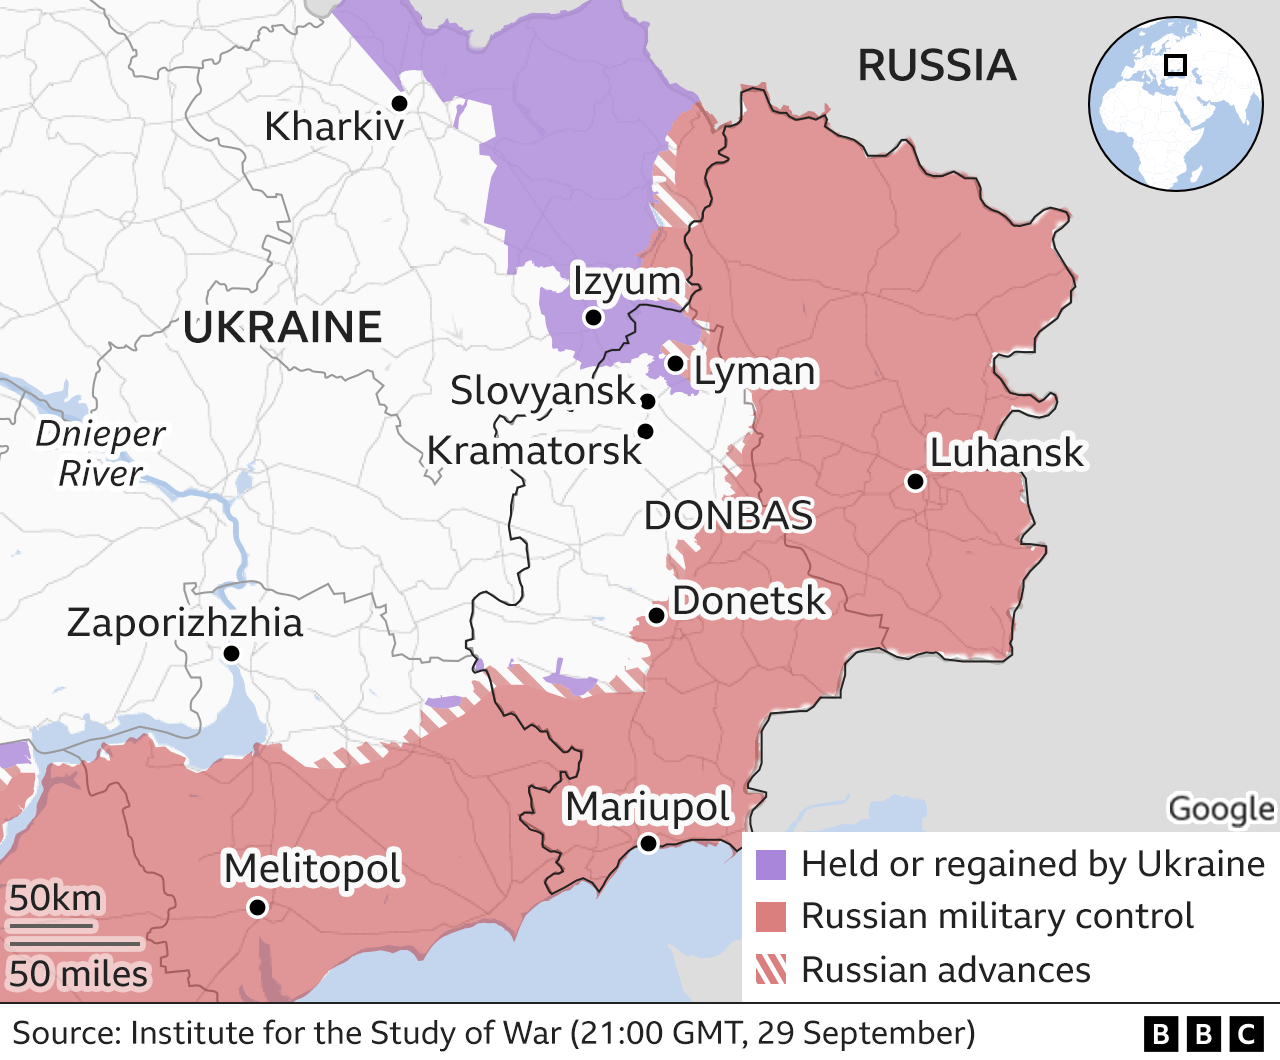 BBC map shows areas of Russian control in eastern Ukraine - as well as Ukrainian advances, including around Lyman in the Donetsk region